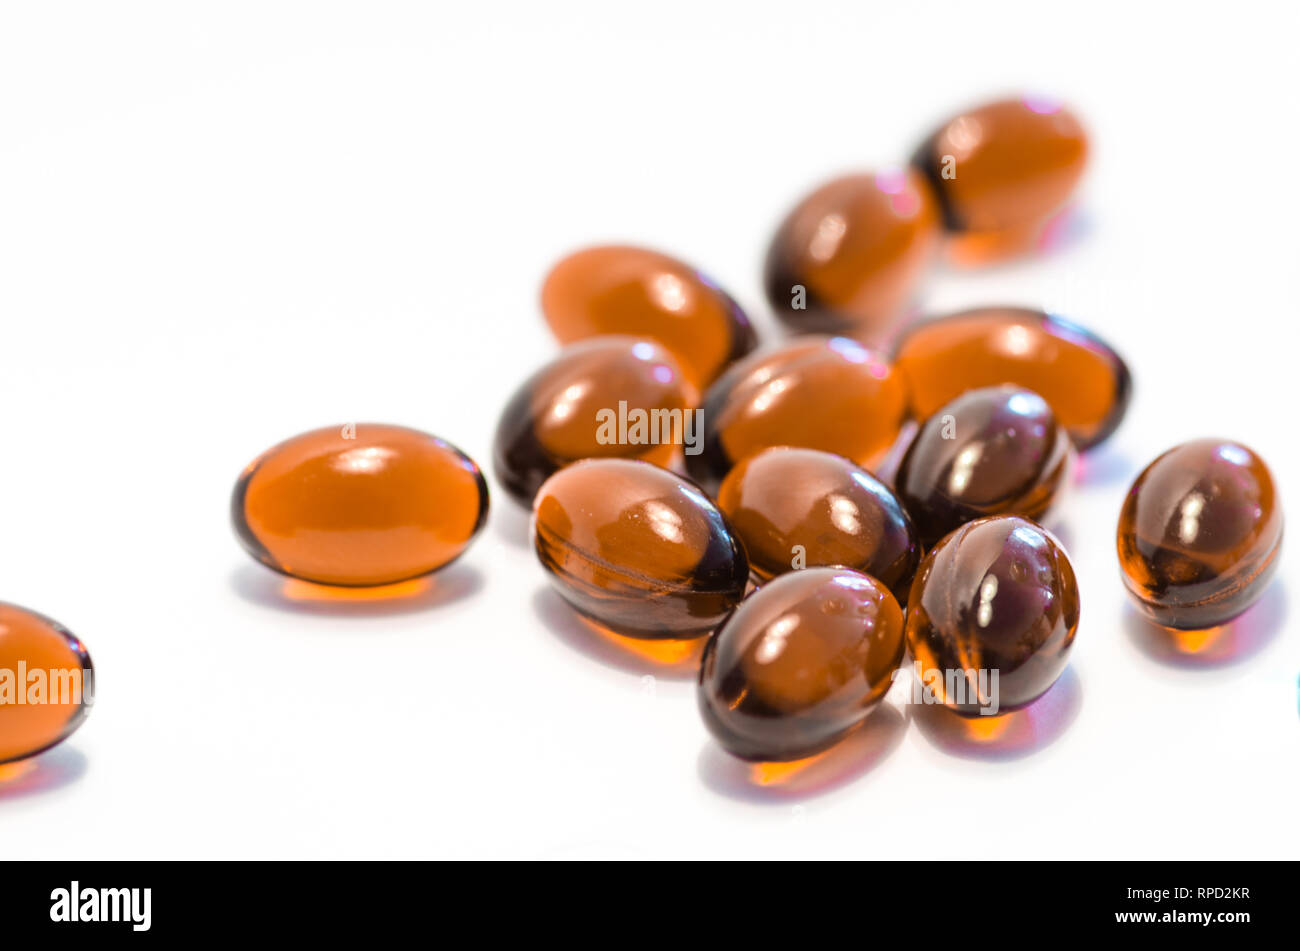 Supplement used in fitness and training. Amminoacids, Omega3, Protein and scoops Stock Photo